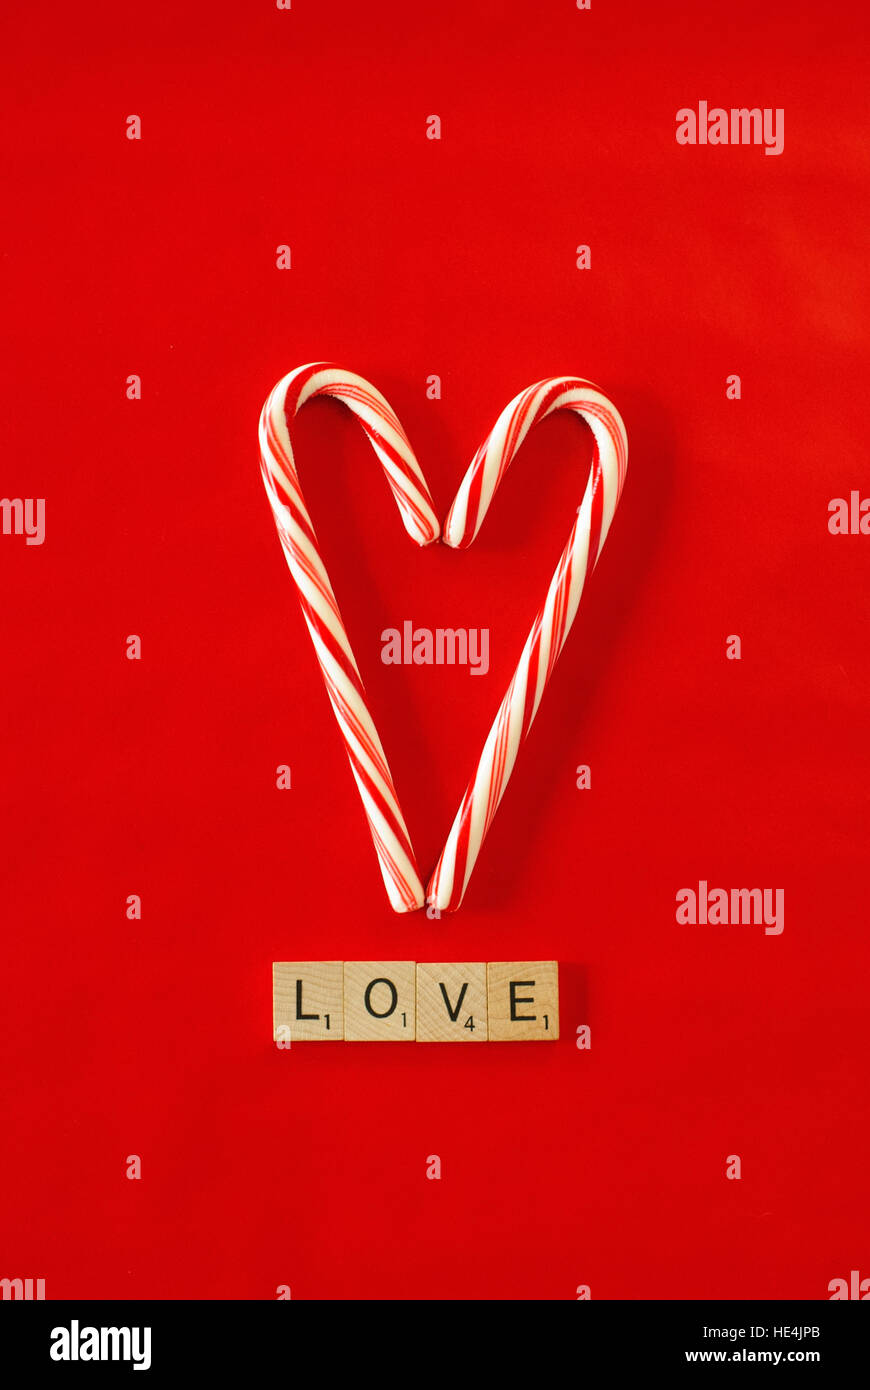 candy cane heart on red background, love in scrabble letters Stock Photo